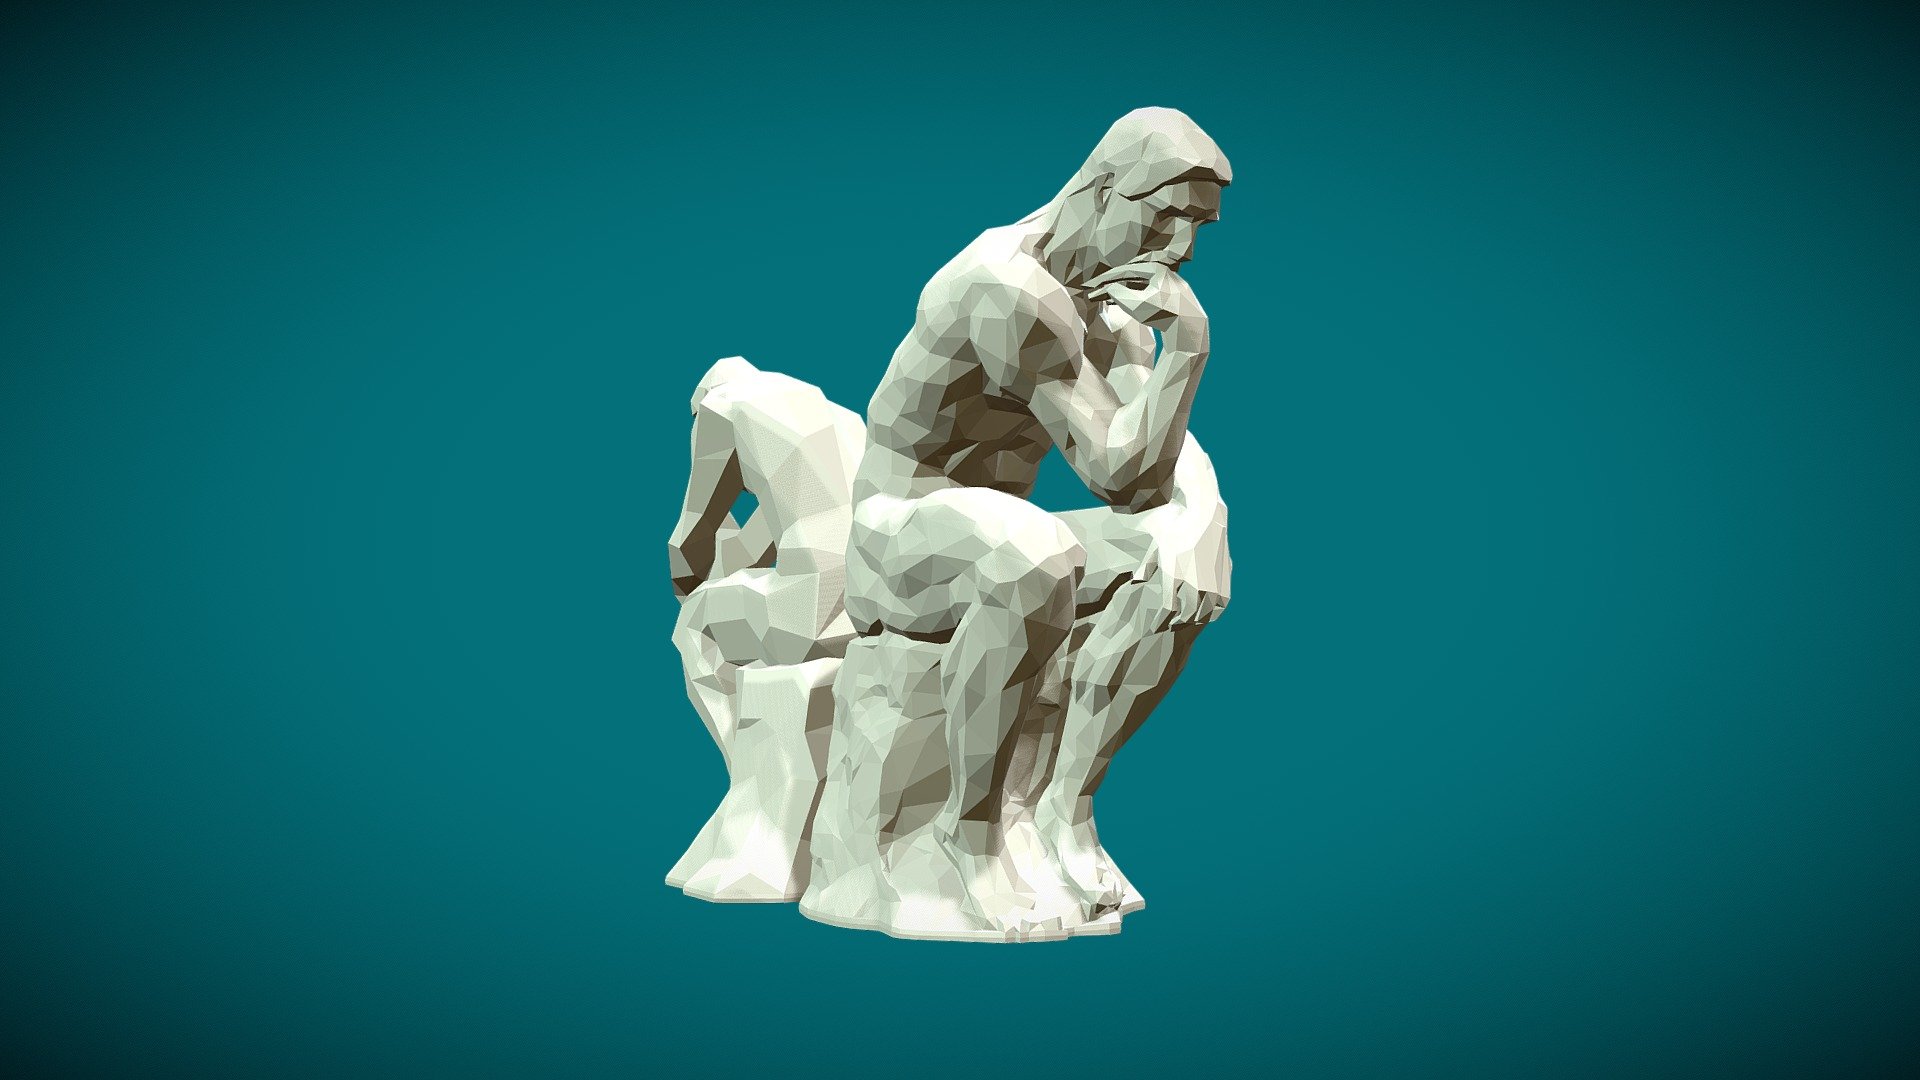 A High-Quality Low Poly 3D model of The Thinker Statue.

The product includes:  

3D models:




Blender Version 2.80 file (includes two low poly versions).

OBJ files (includes two low poly versions).

Element 3D version 2 project files (includes two low poly versions).

FBX files (includes two low poly versions).

STL files (includes two low poly versions).

Buy this item NOW to help make your production process much faster.

Visit our website at www.klockworkanimation.com 3d model